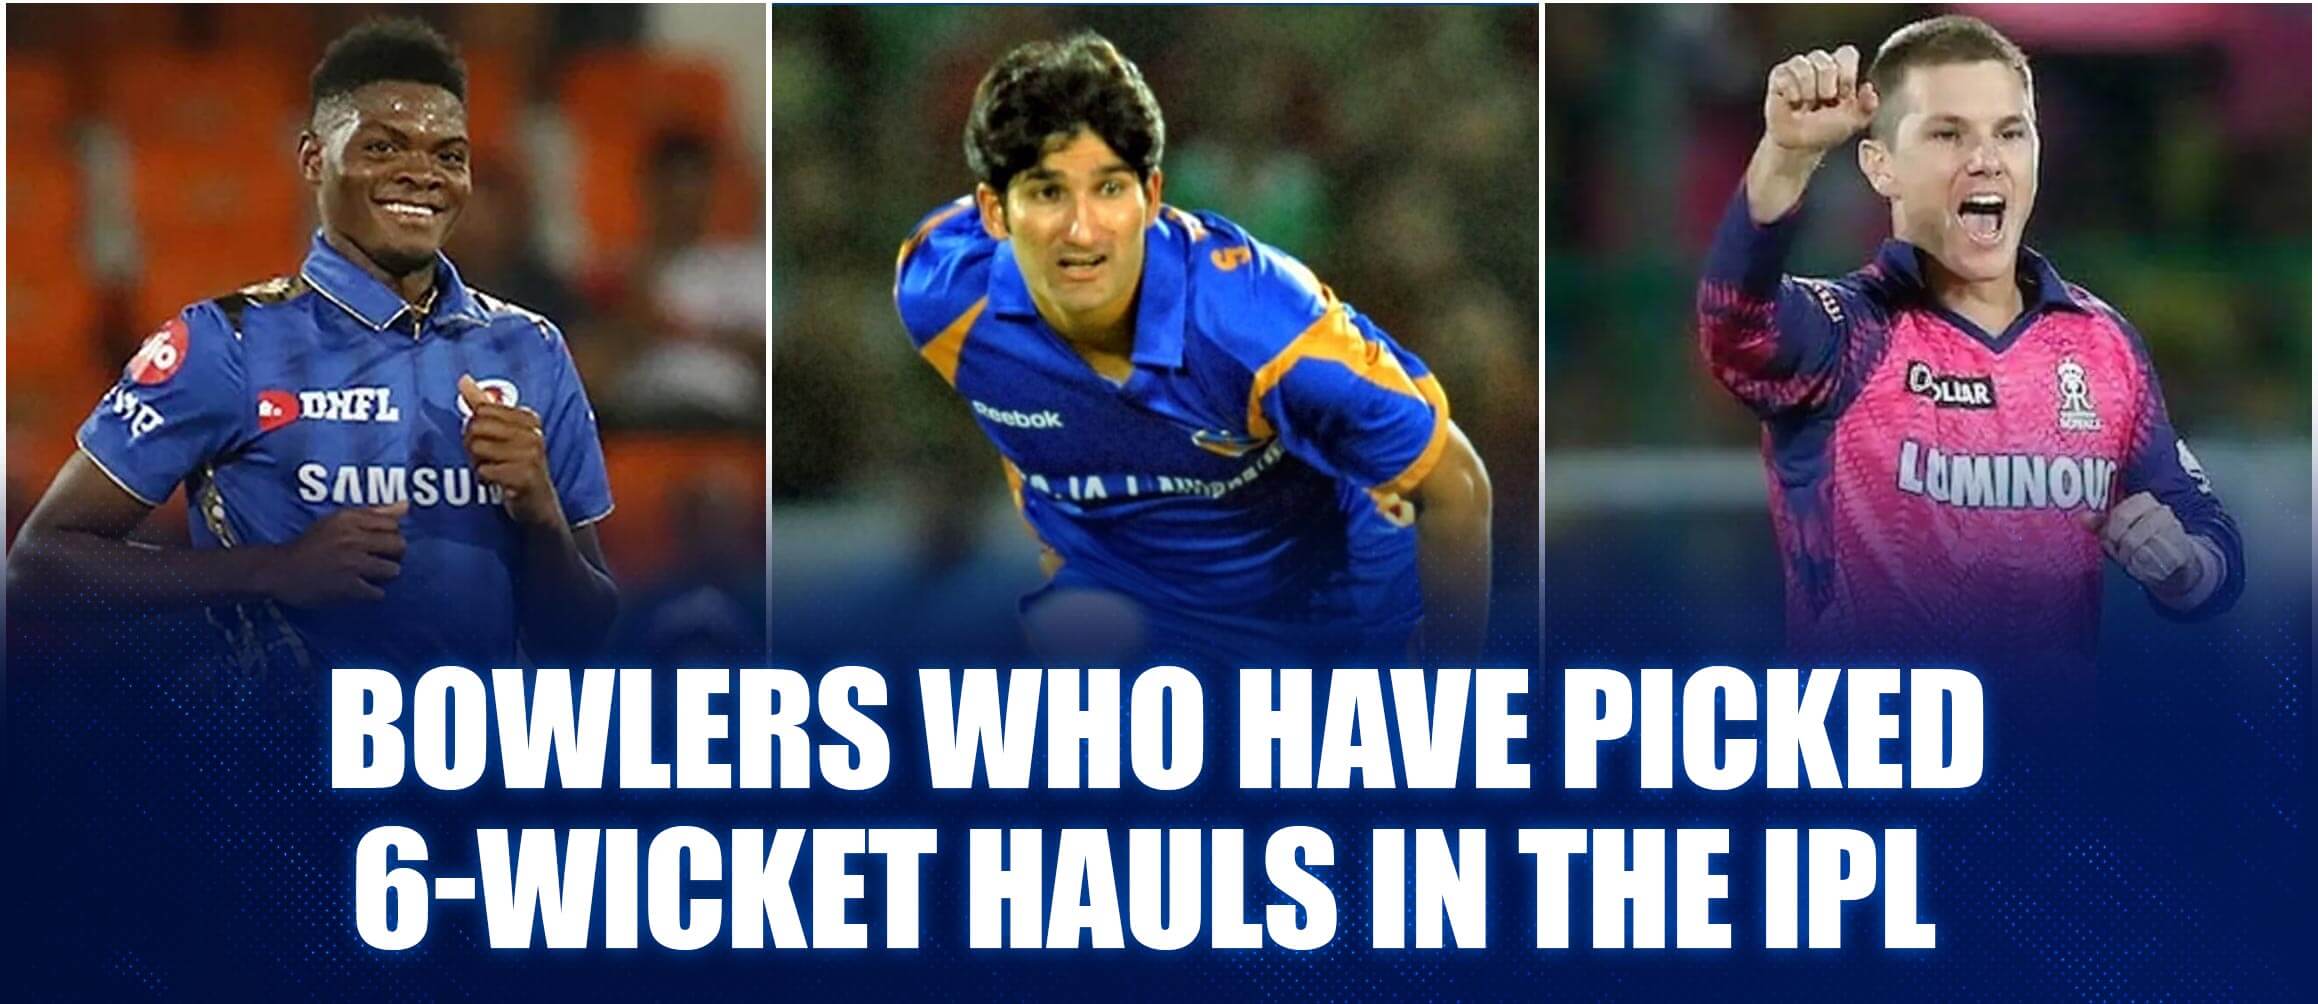 Bowlers Who Have Picked 6-Wicket Hauls In The IPL